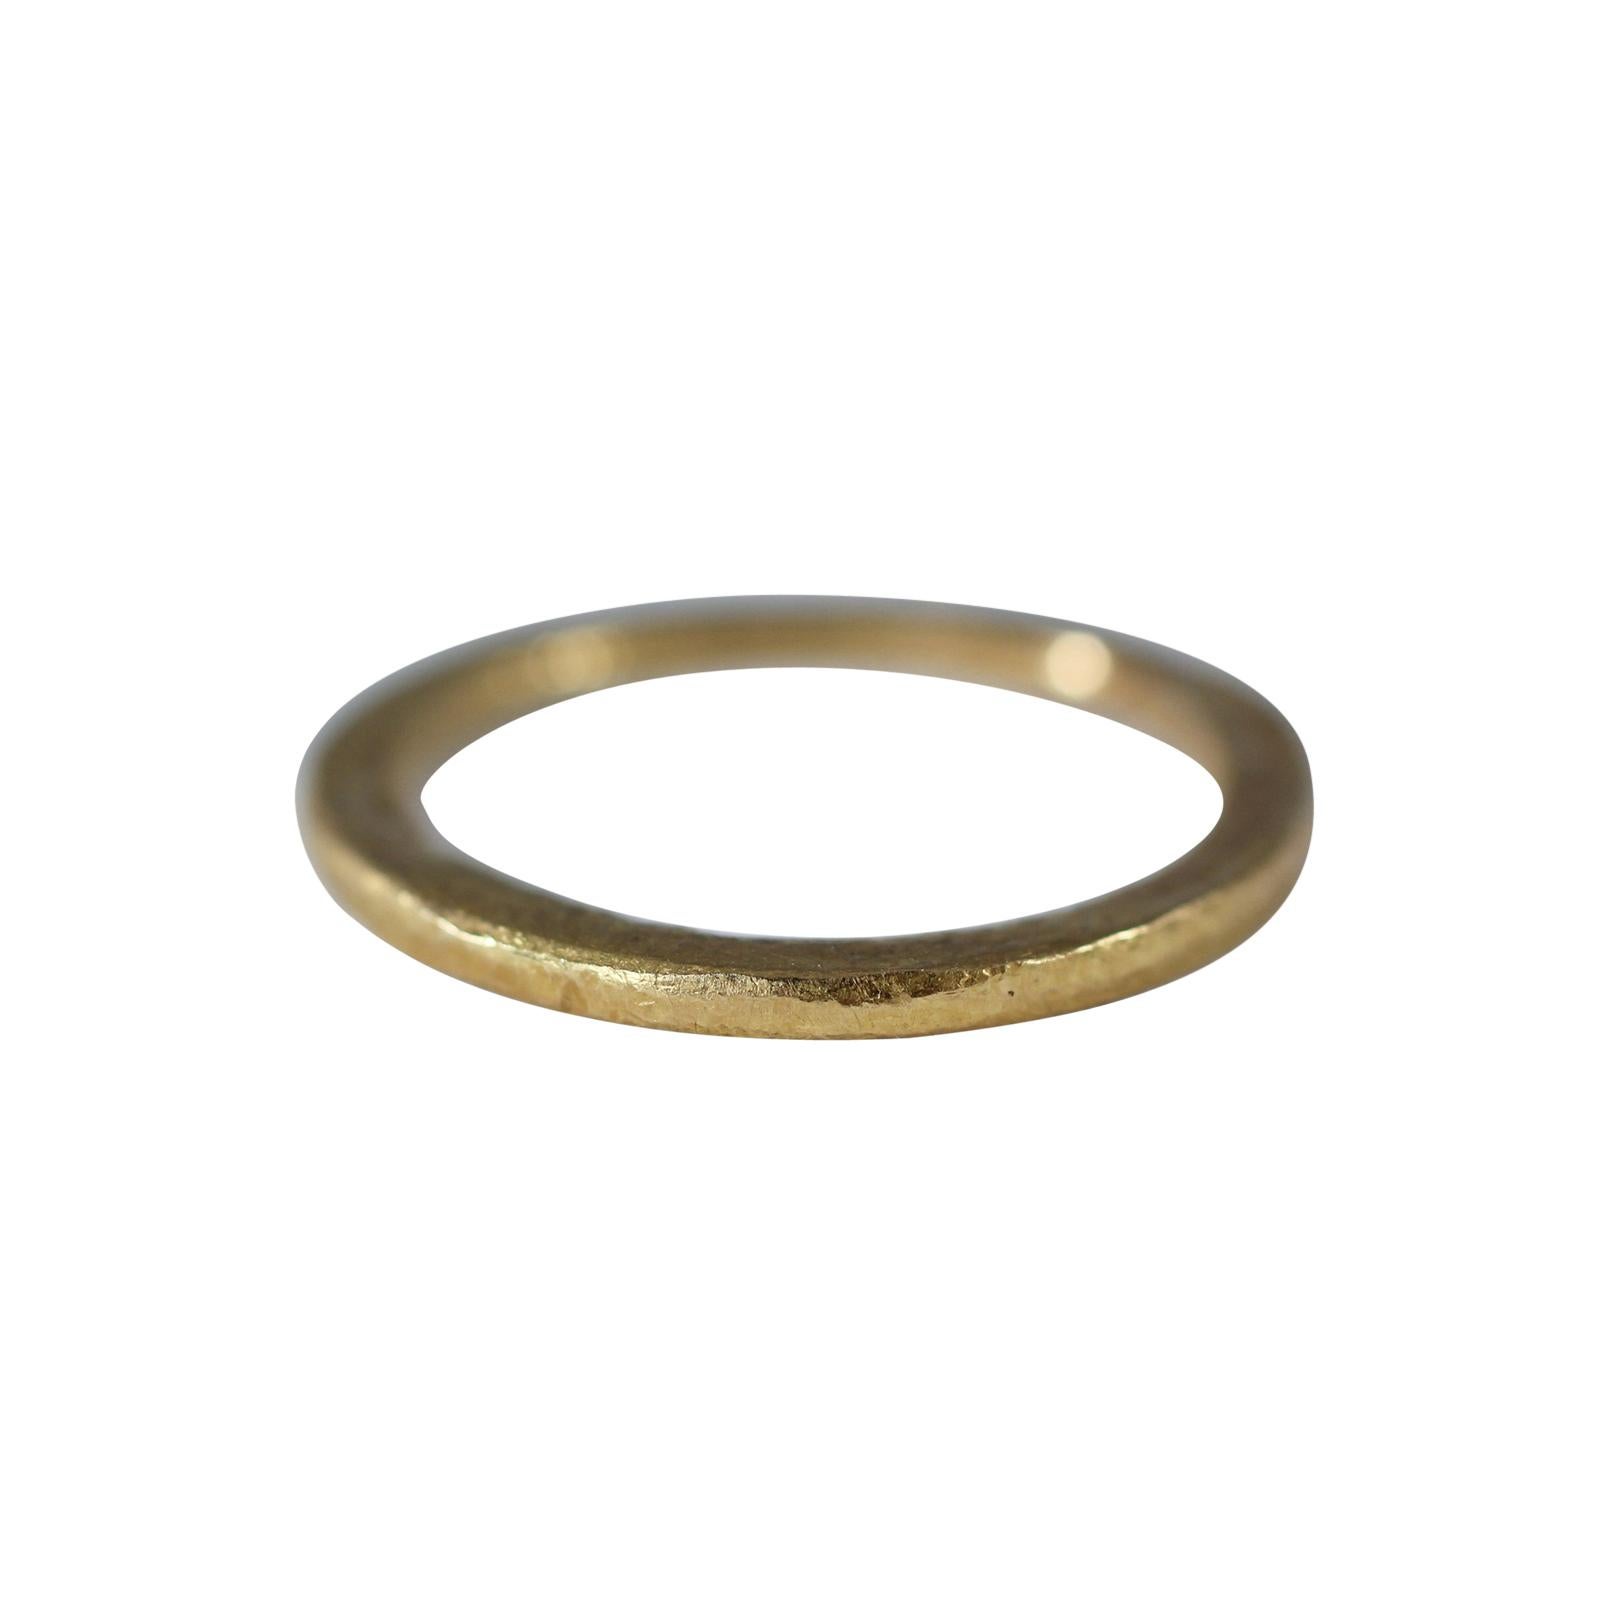 22 Karat Gold Wedding Band Ring Unisex Stacking Disk Design by AB Jewelry NYC